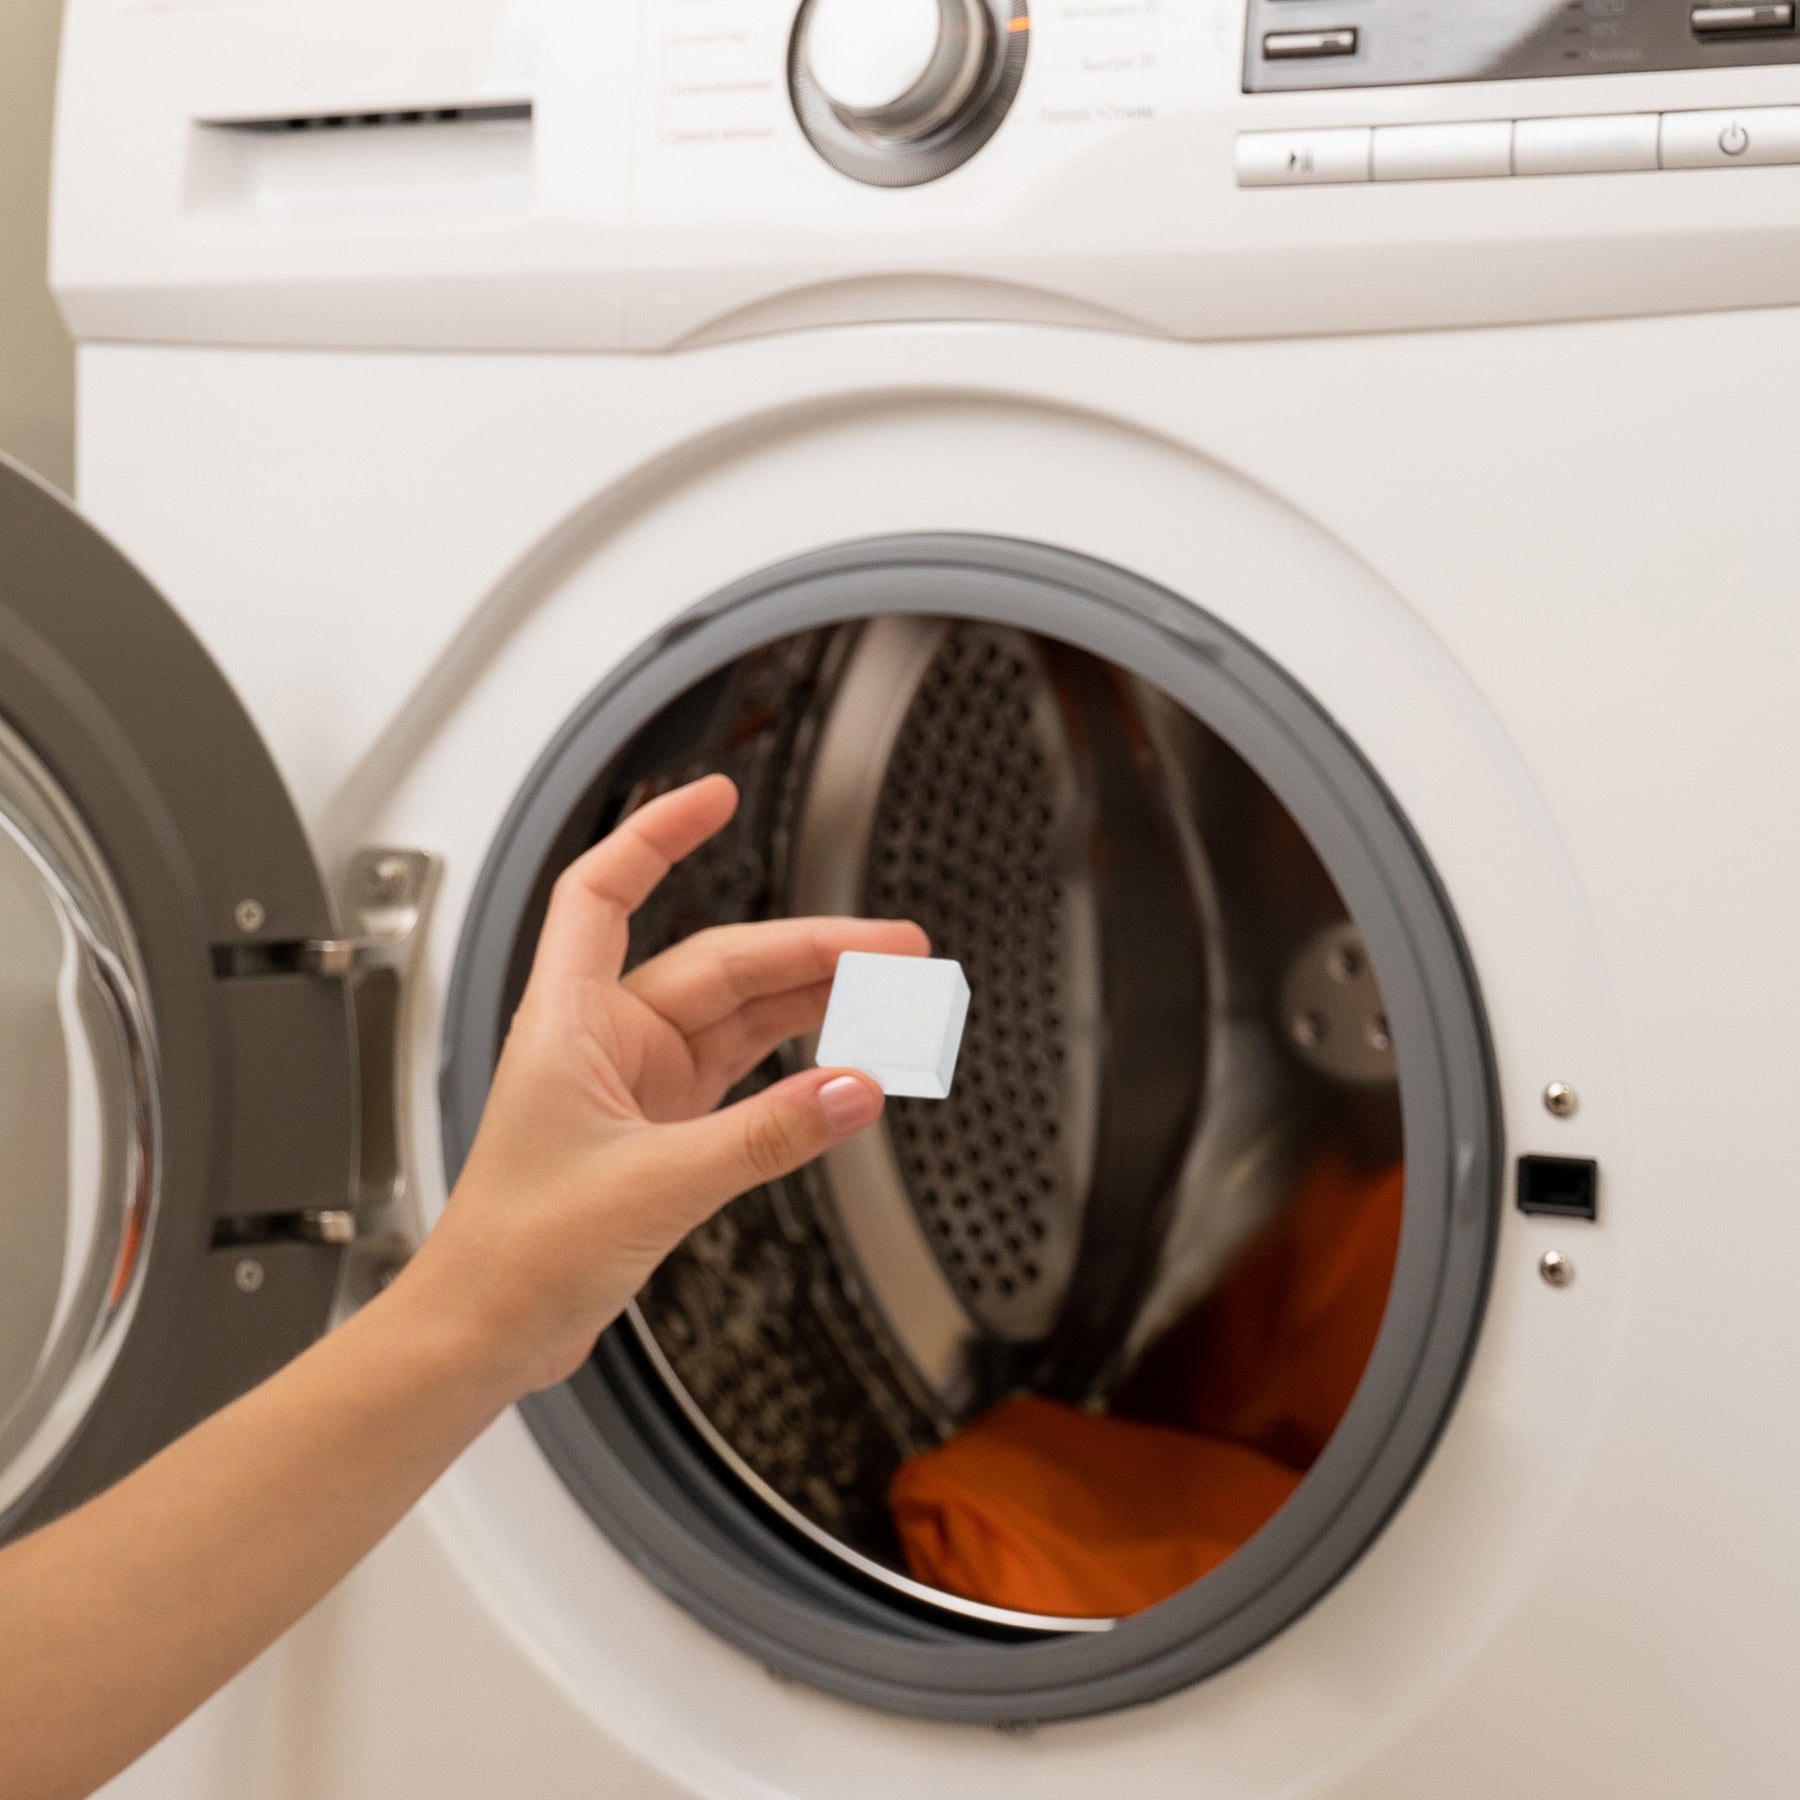 Load video: &lt;p&gt;Toss the FabTab detergent tablet into the drum of your washing machine (before adding your laundry) and let the suds party begin.&lt;/p&gt;